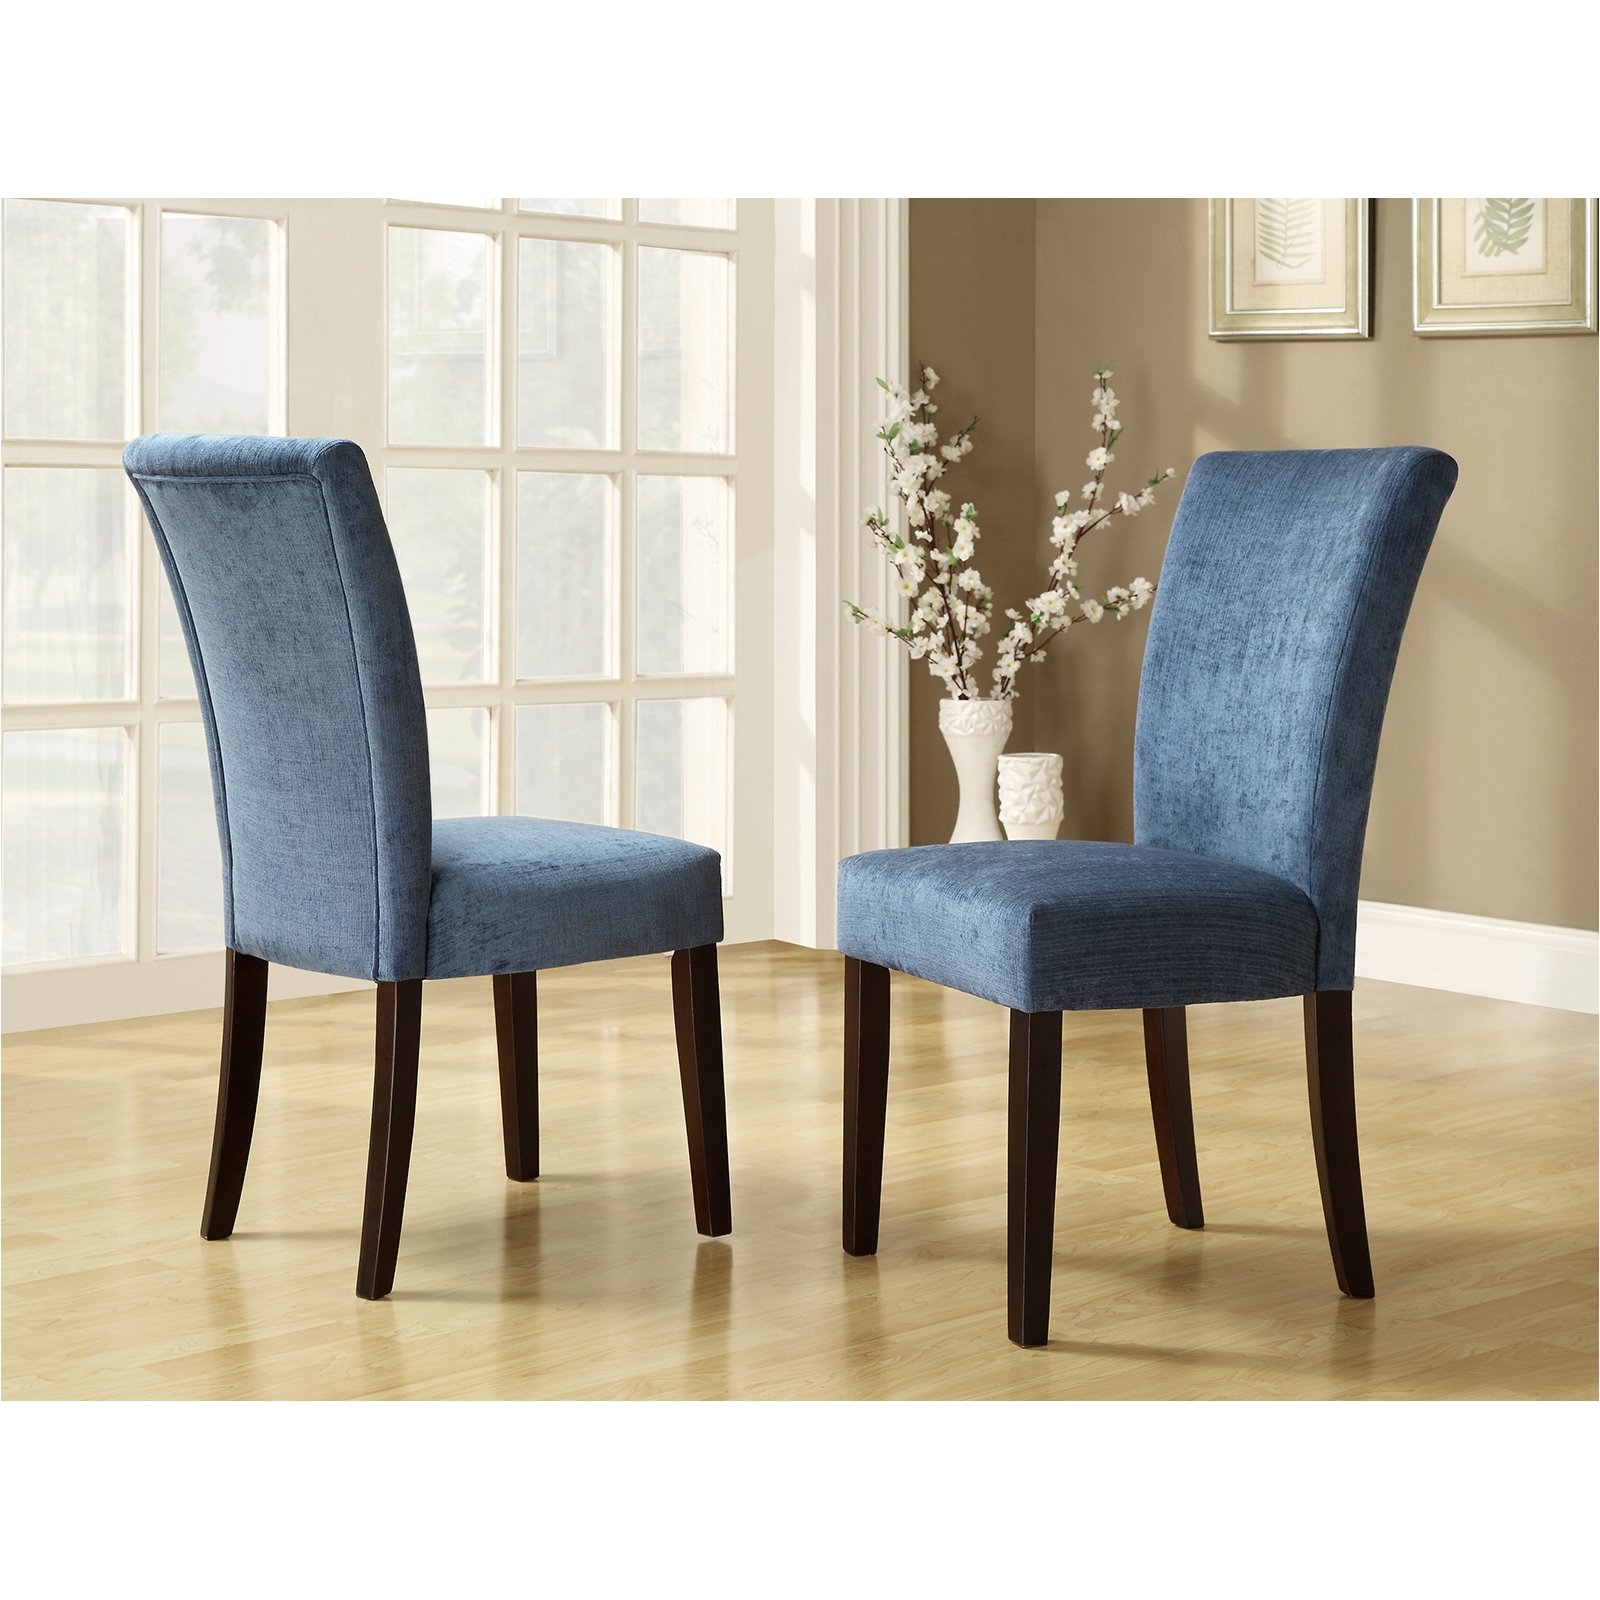 Stein Mart Dining Chairs Furniture Elegant Royal Blue Parson Dining Chairs for Your Home